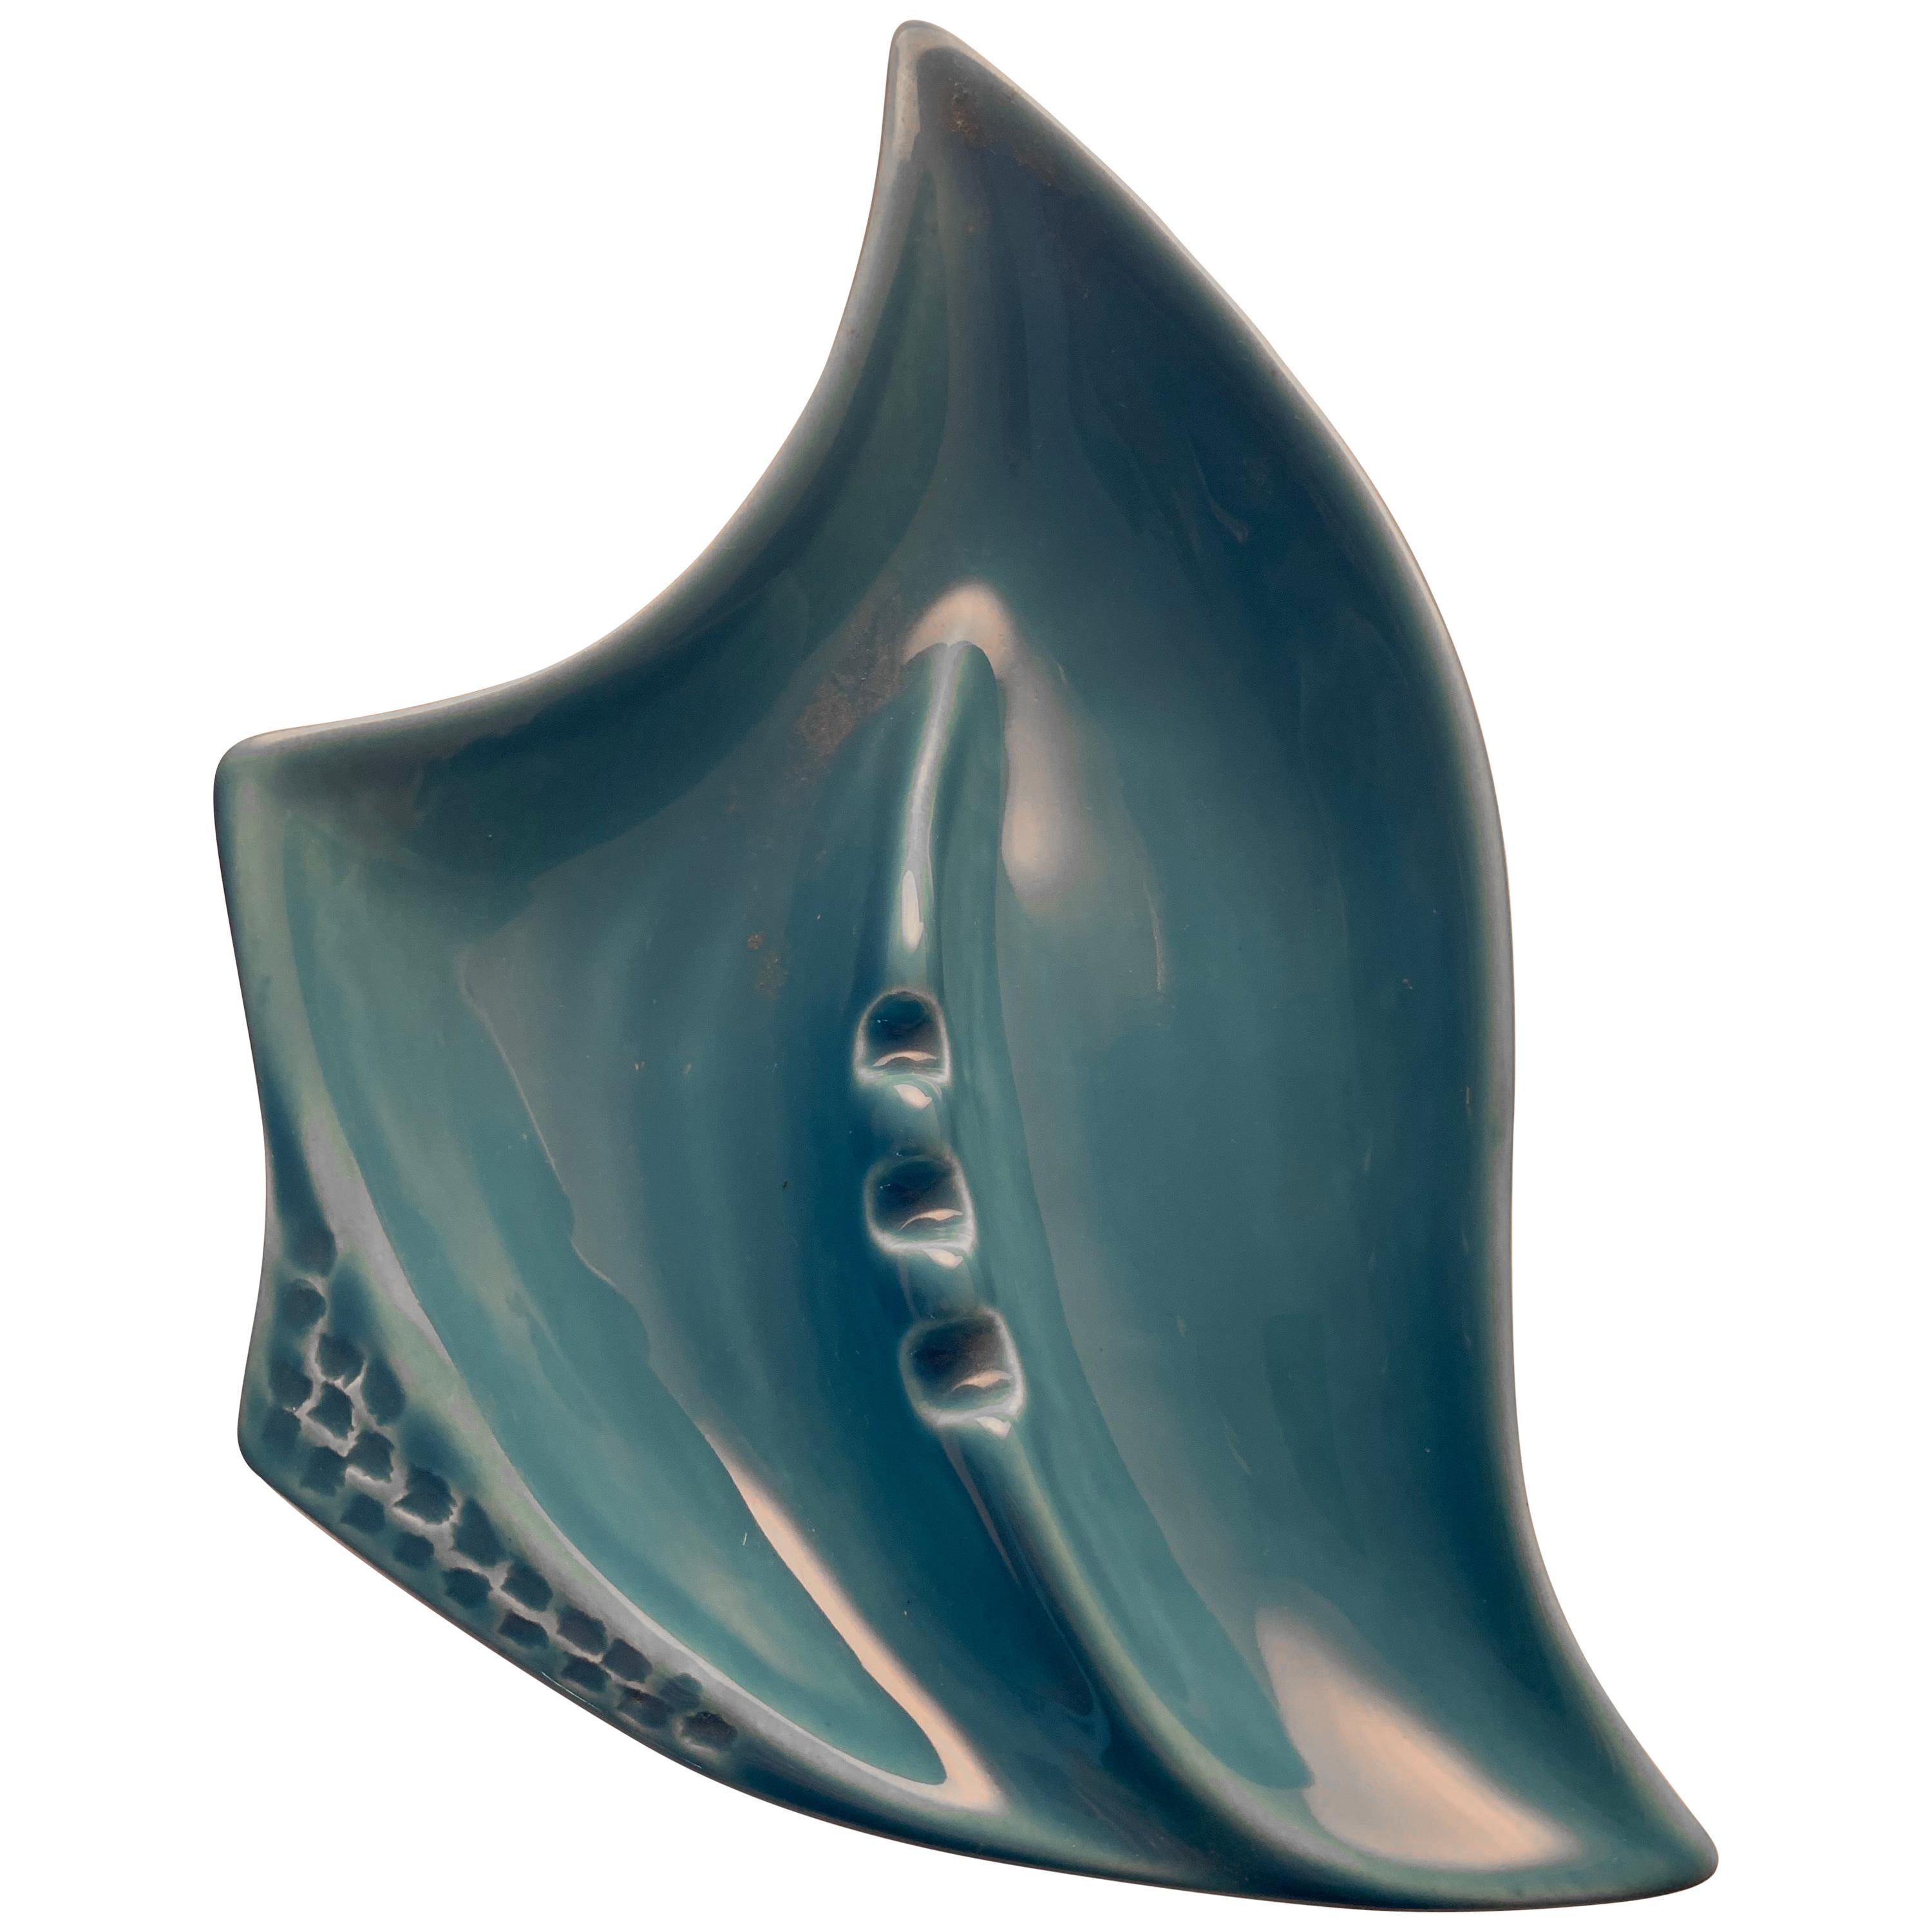 Ceramic Blue Ashtray by Artists Sarah Crowner, Vagina-Shaped, 2017 For Sale